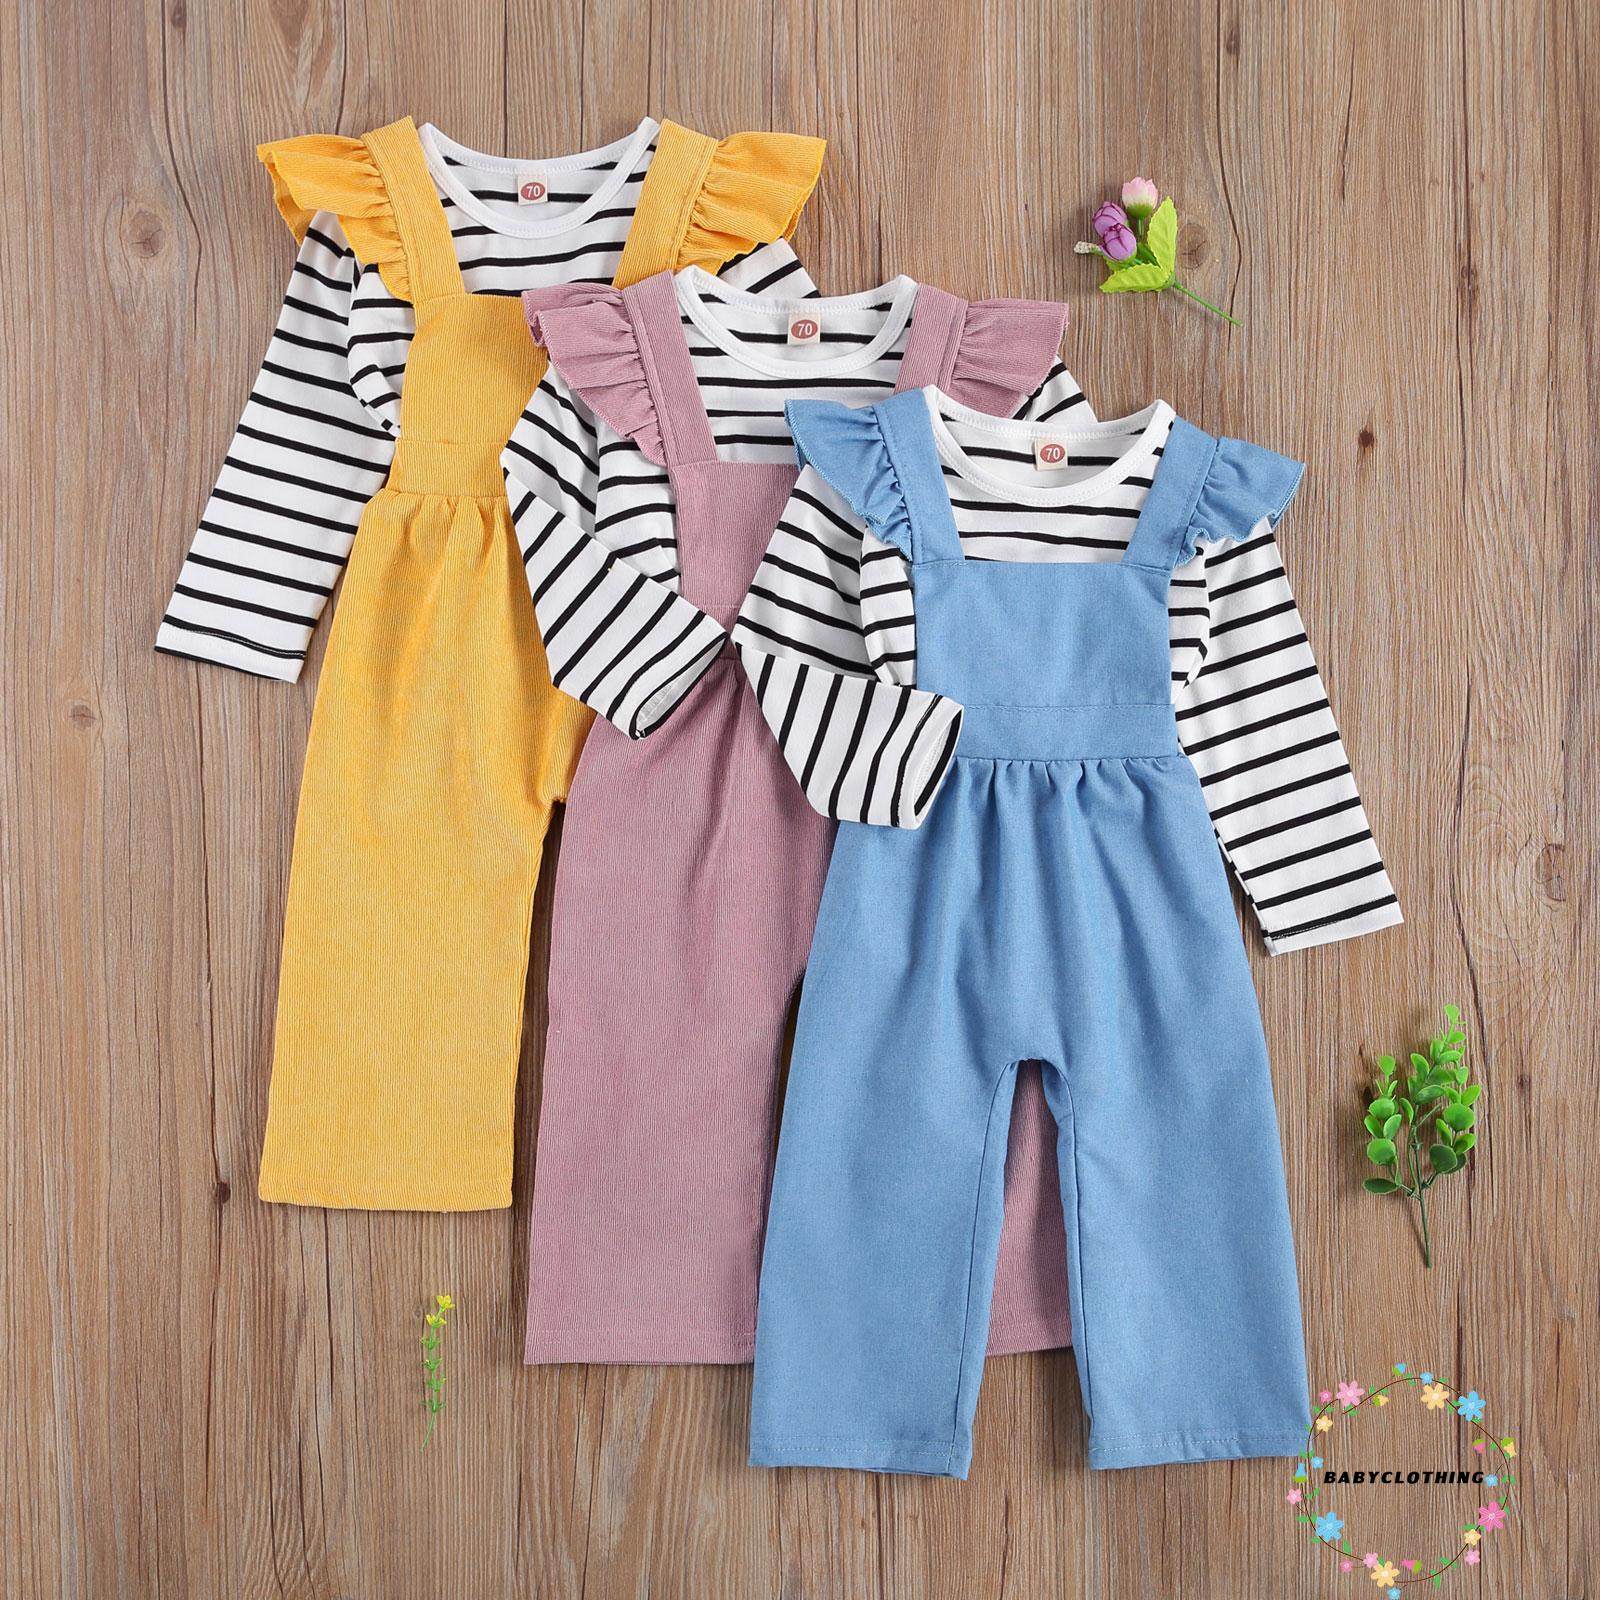 BBCQ-2-piece Little Girls Overall Set, Children Stripe Print Long Sleeve Top and Solid Color Suspenders Long Pants